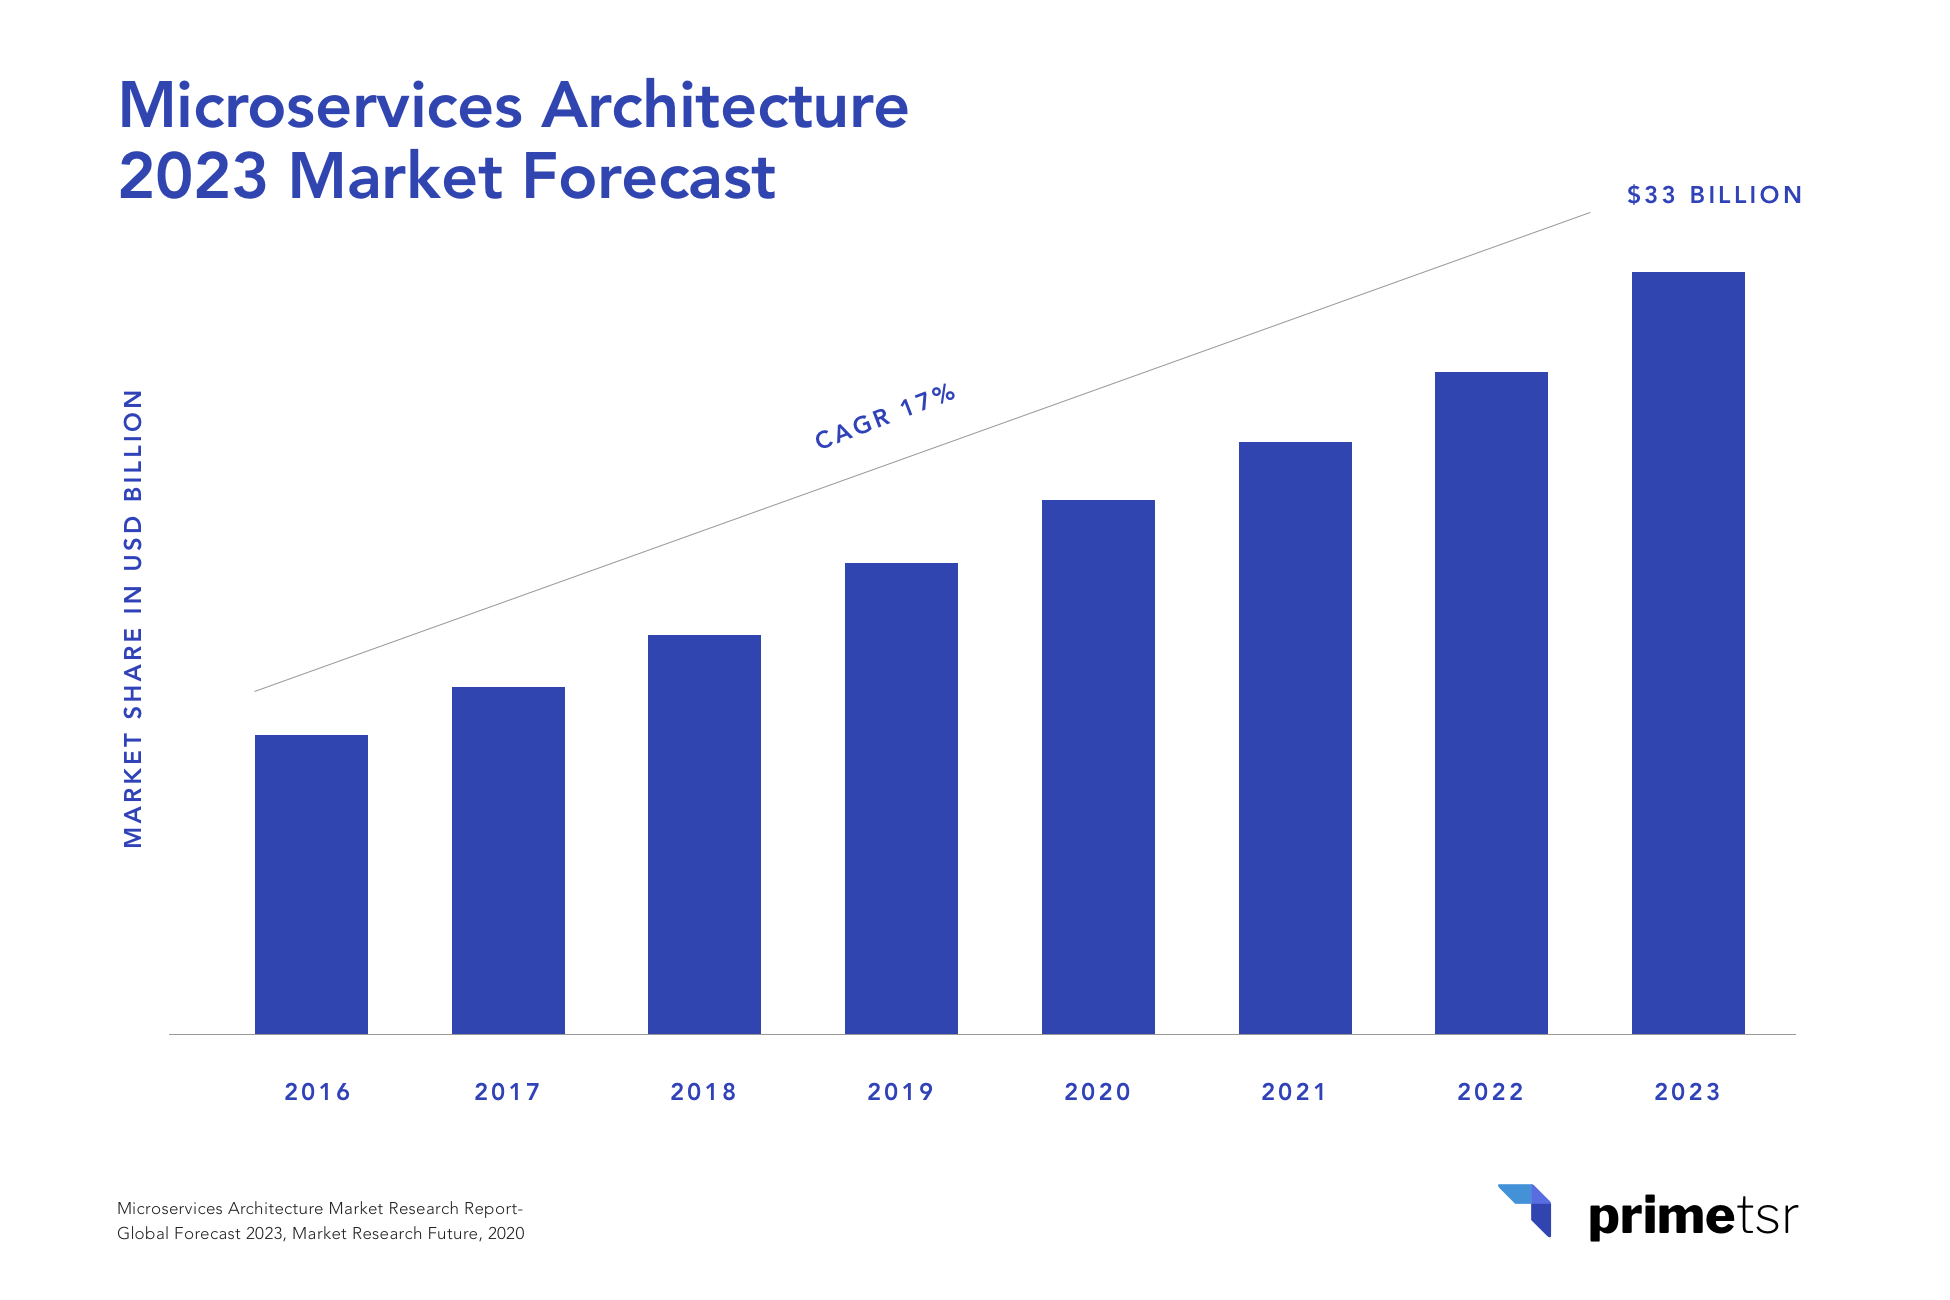 Microservices adoption trend and forecast graph